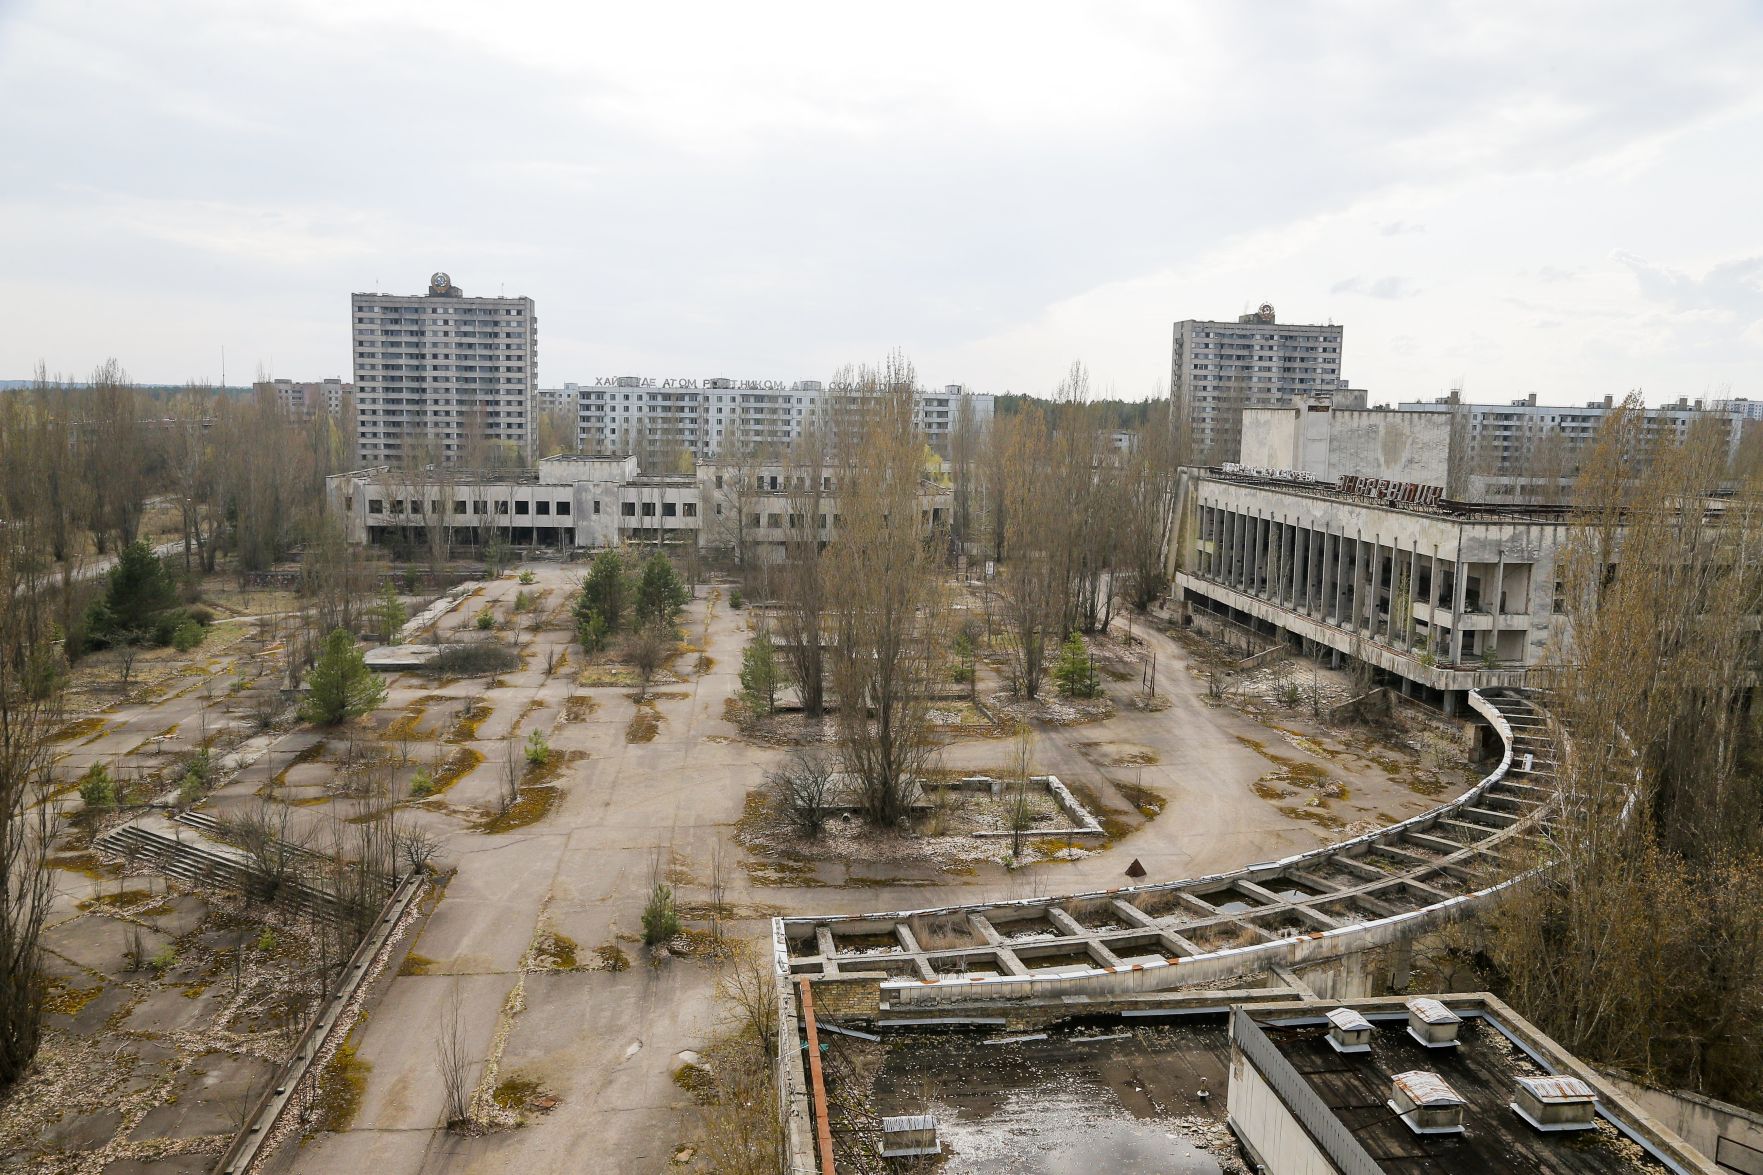 chernobyl aftermath buildings